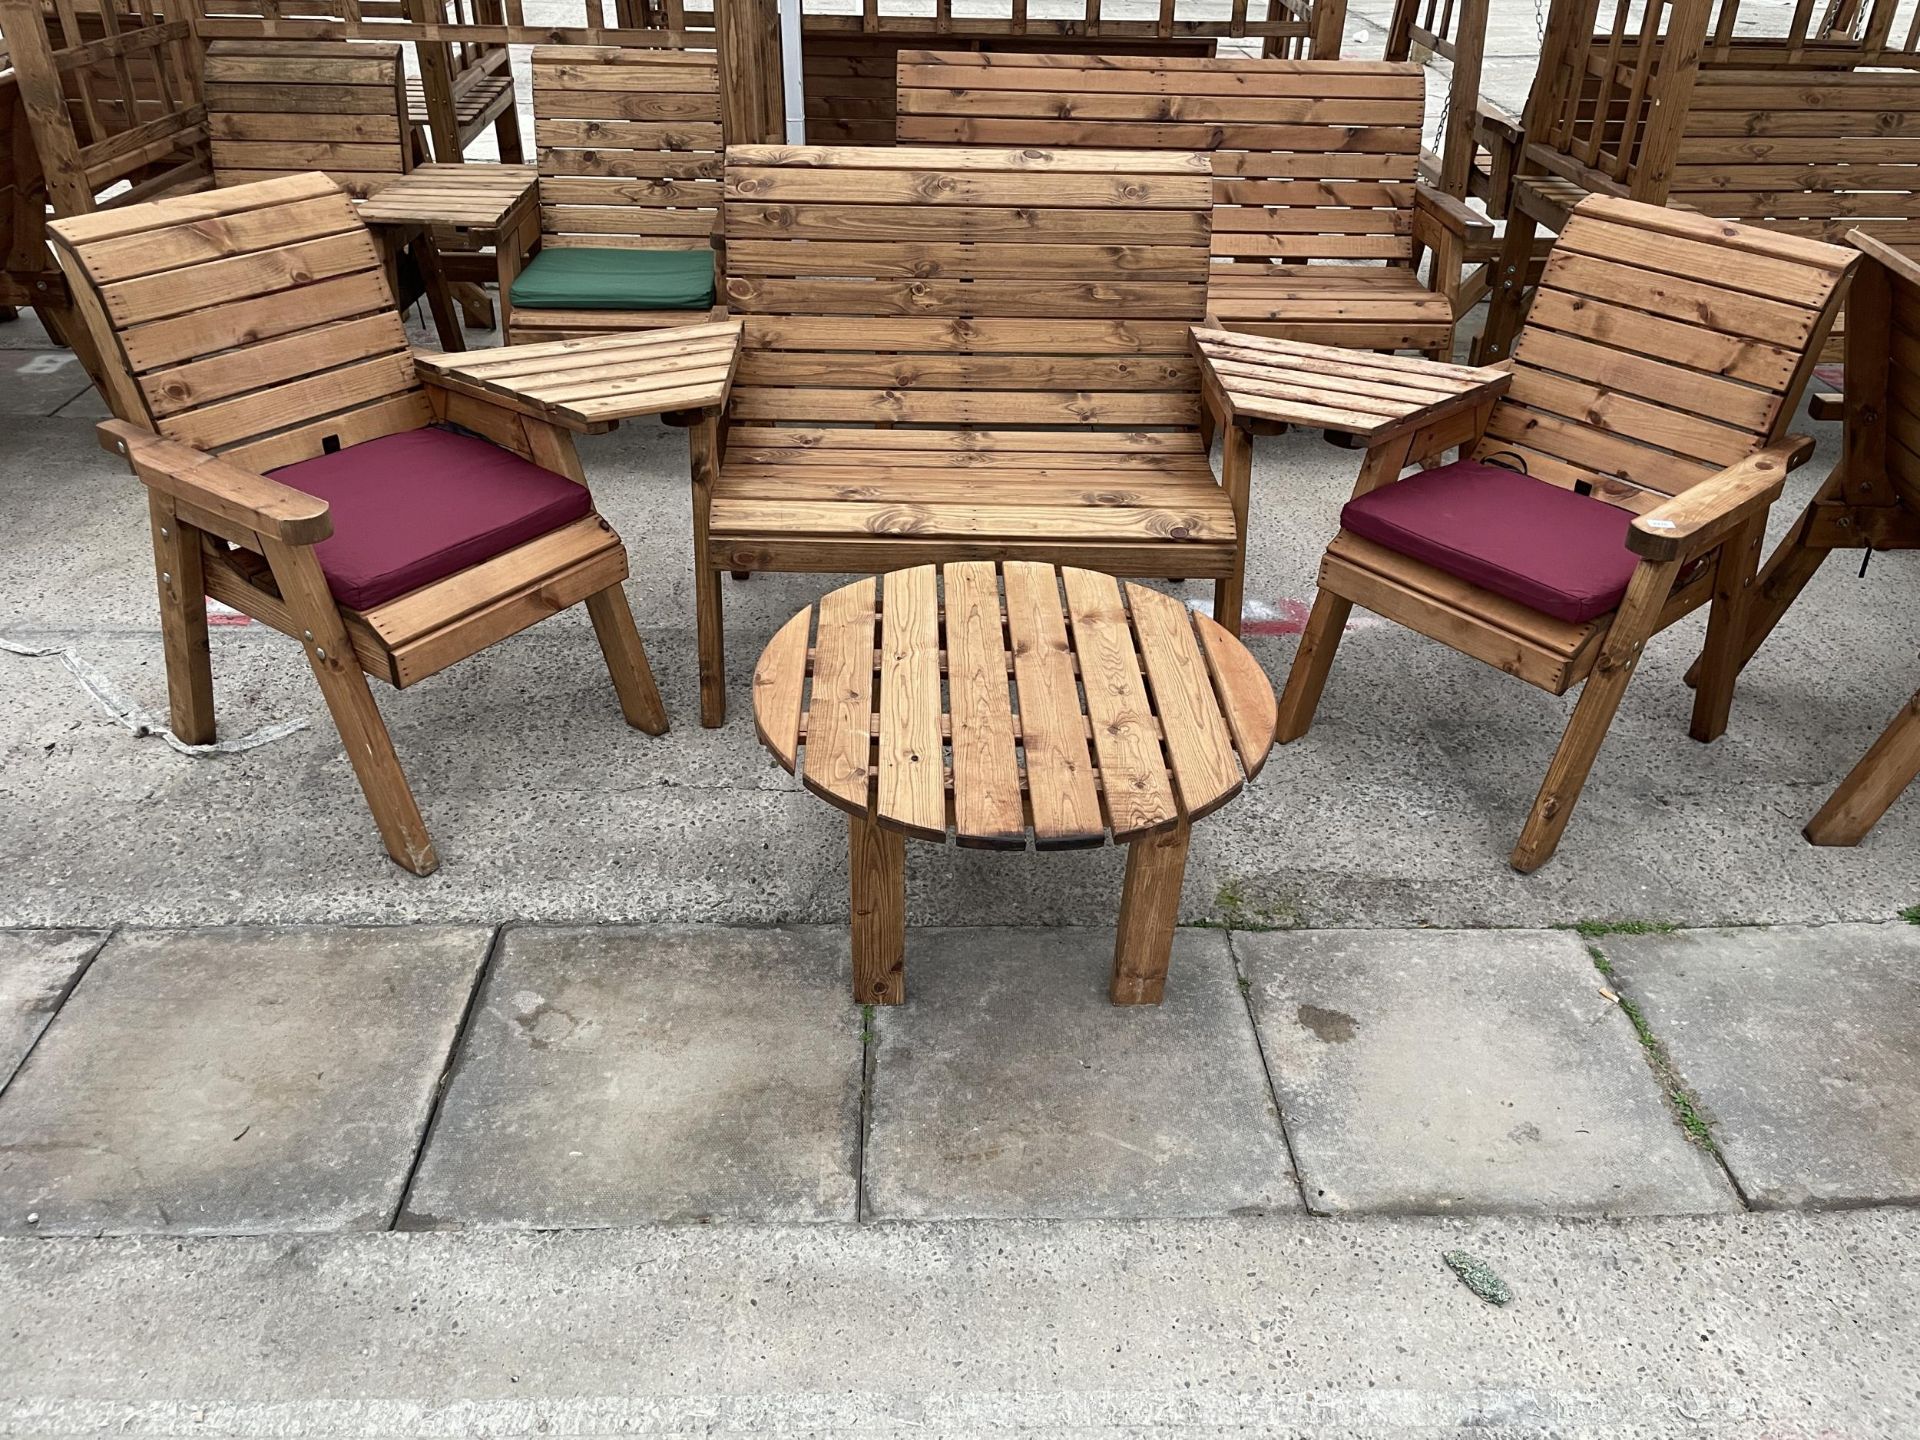 AN AS NEW EX DISPLAY CHARLES TAYLOR PATIO SET COMPRISING OF A TWO SEATER BENCH, TWO CHAIRS, TWO